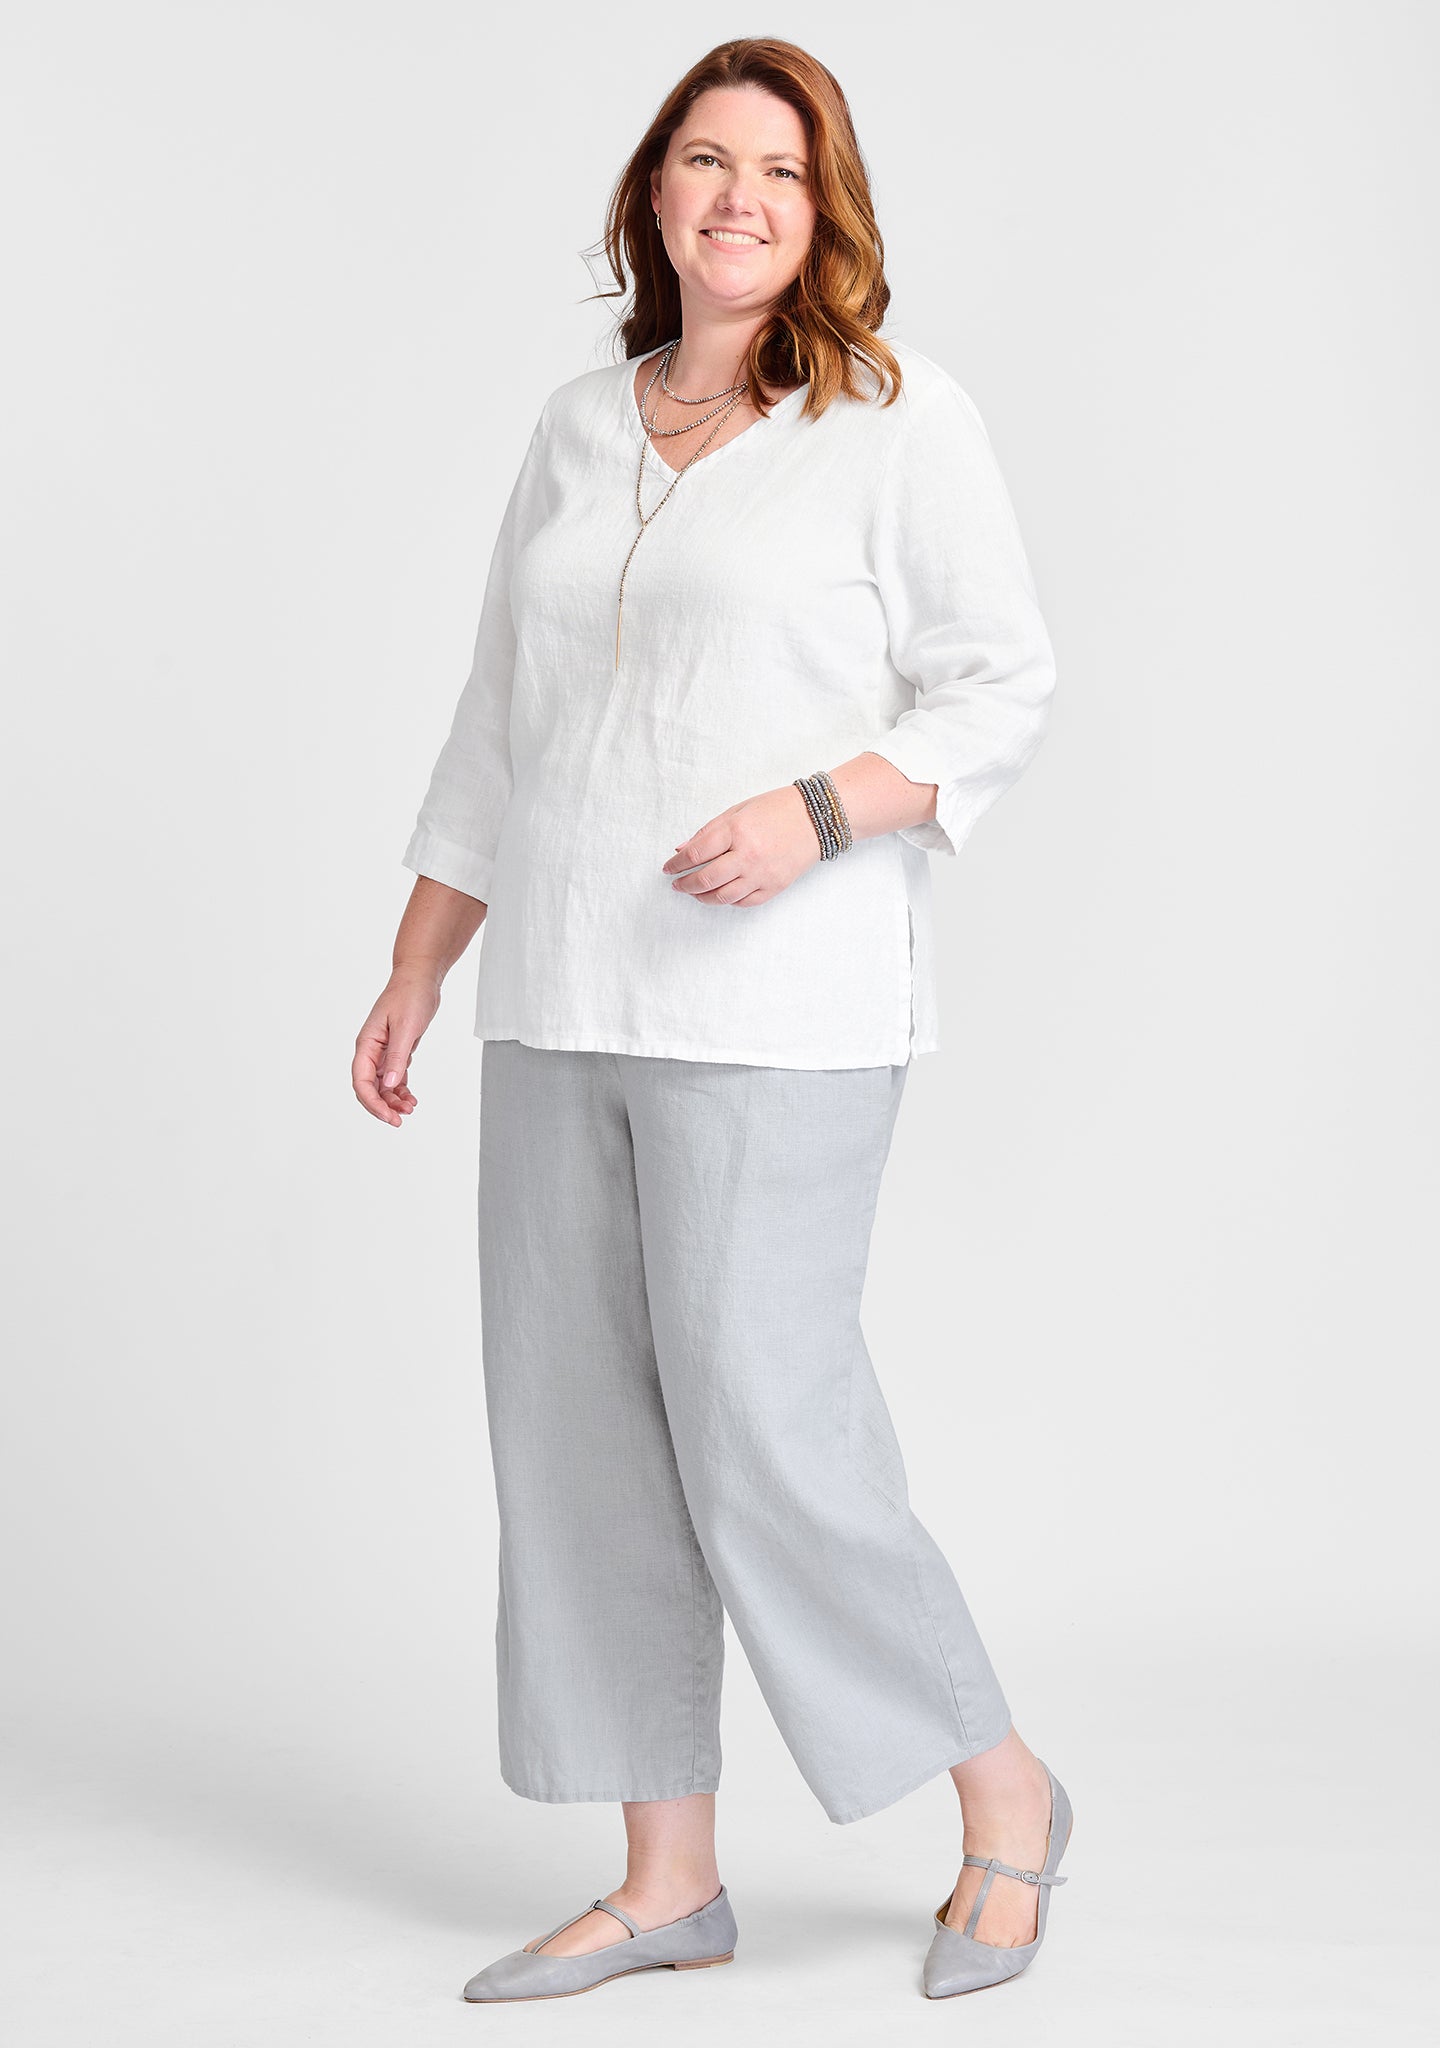 FLAX linen shirt in white with linen pants in grey